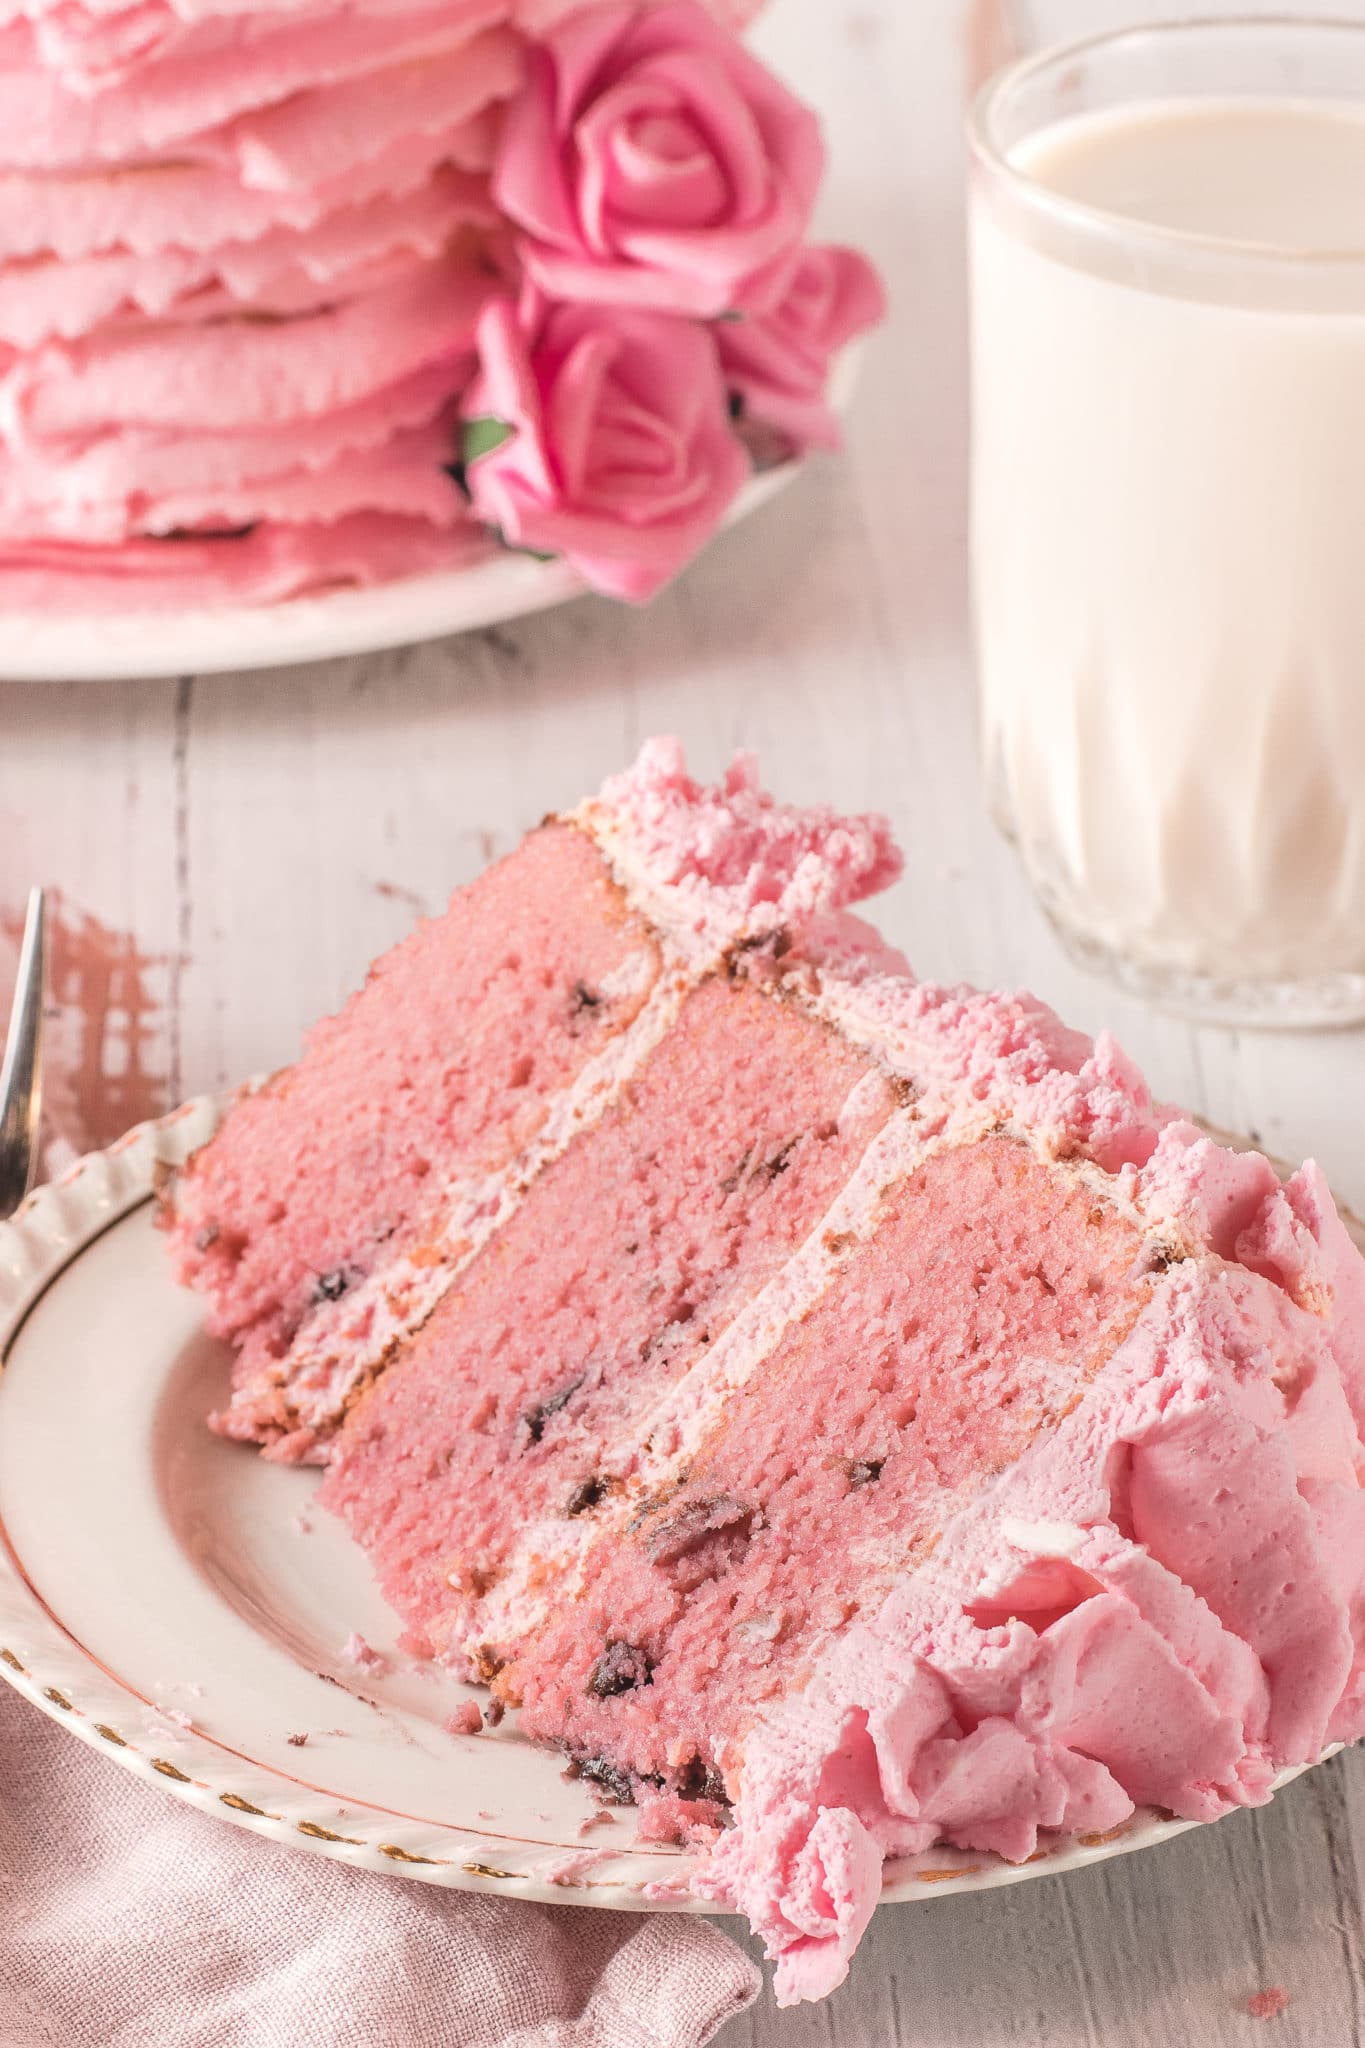 A big slice of pretty pink low carb cherry chip cake on a cream colored plate with gold rim.